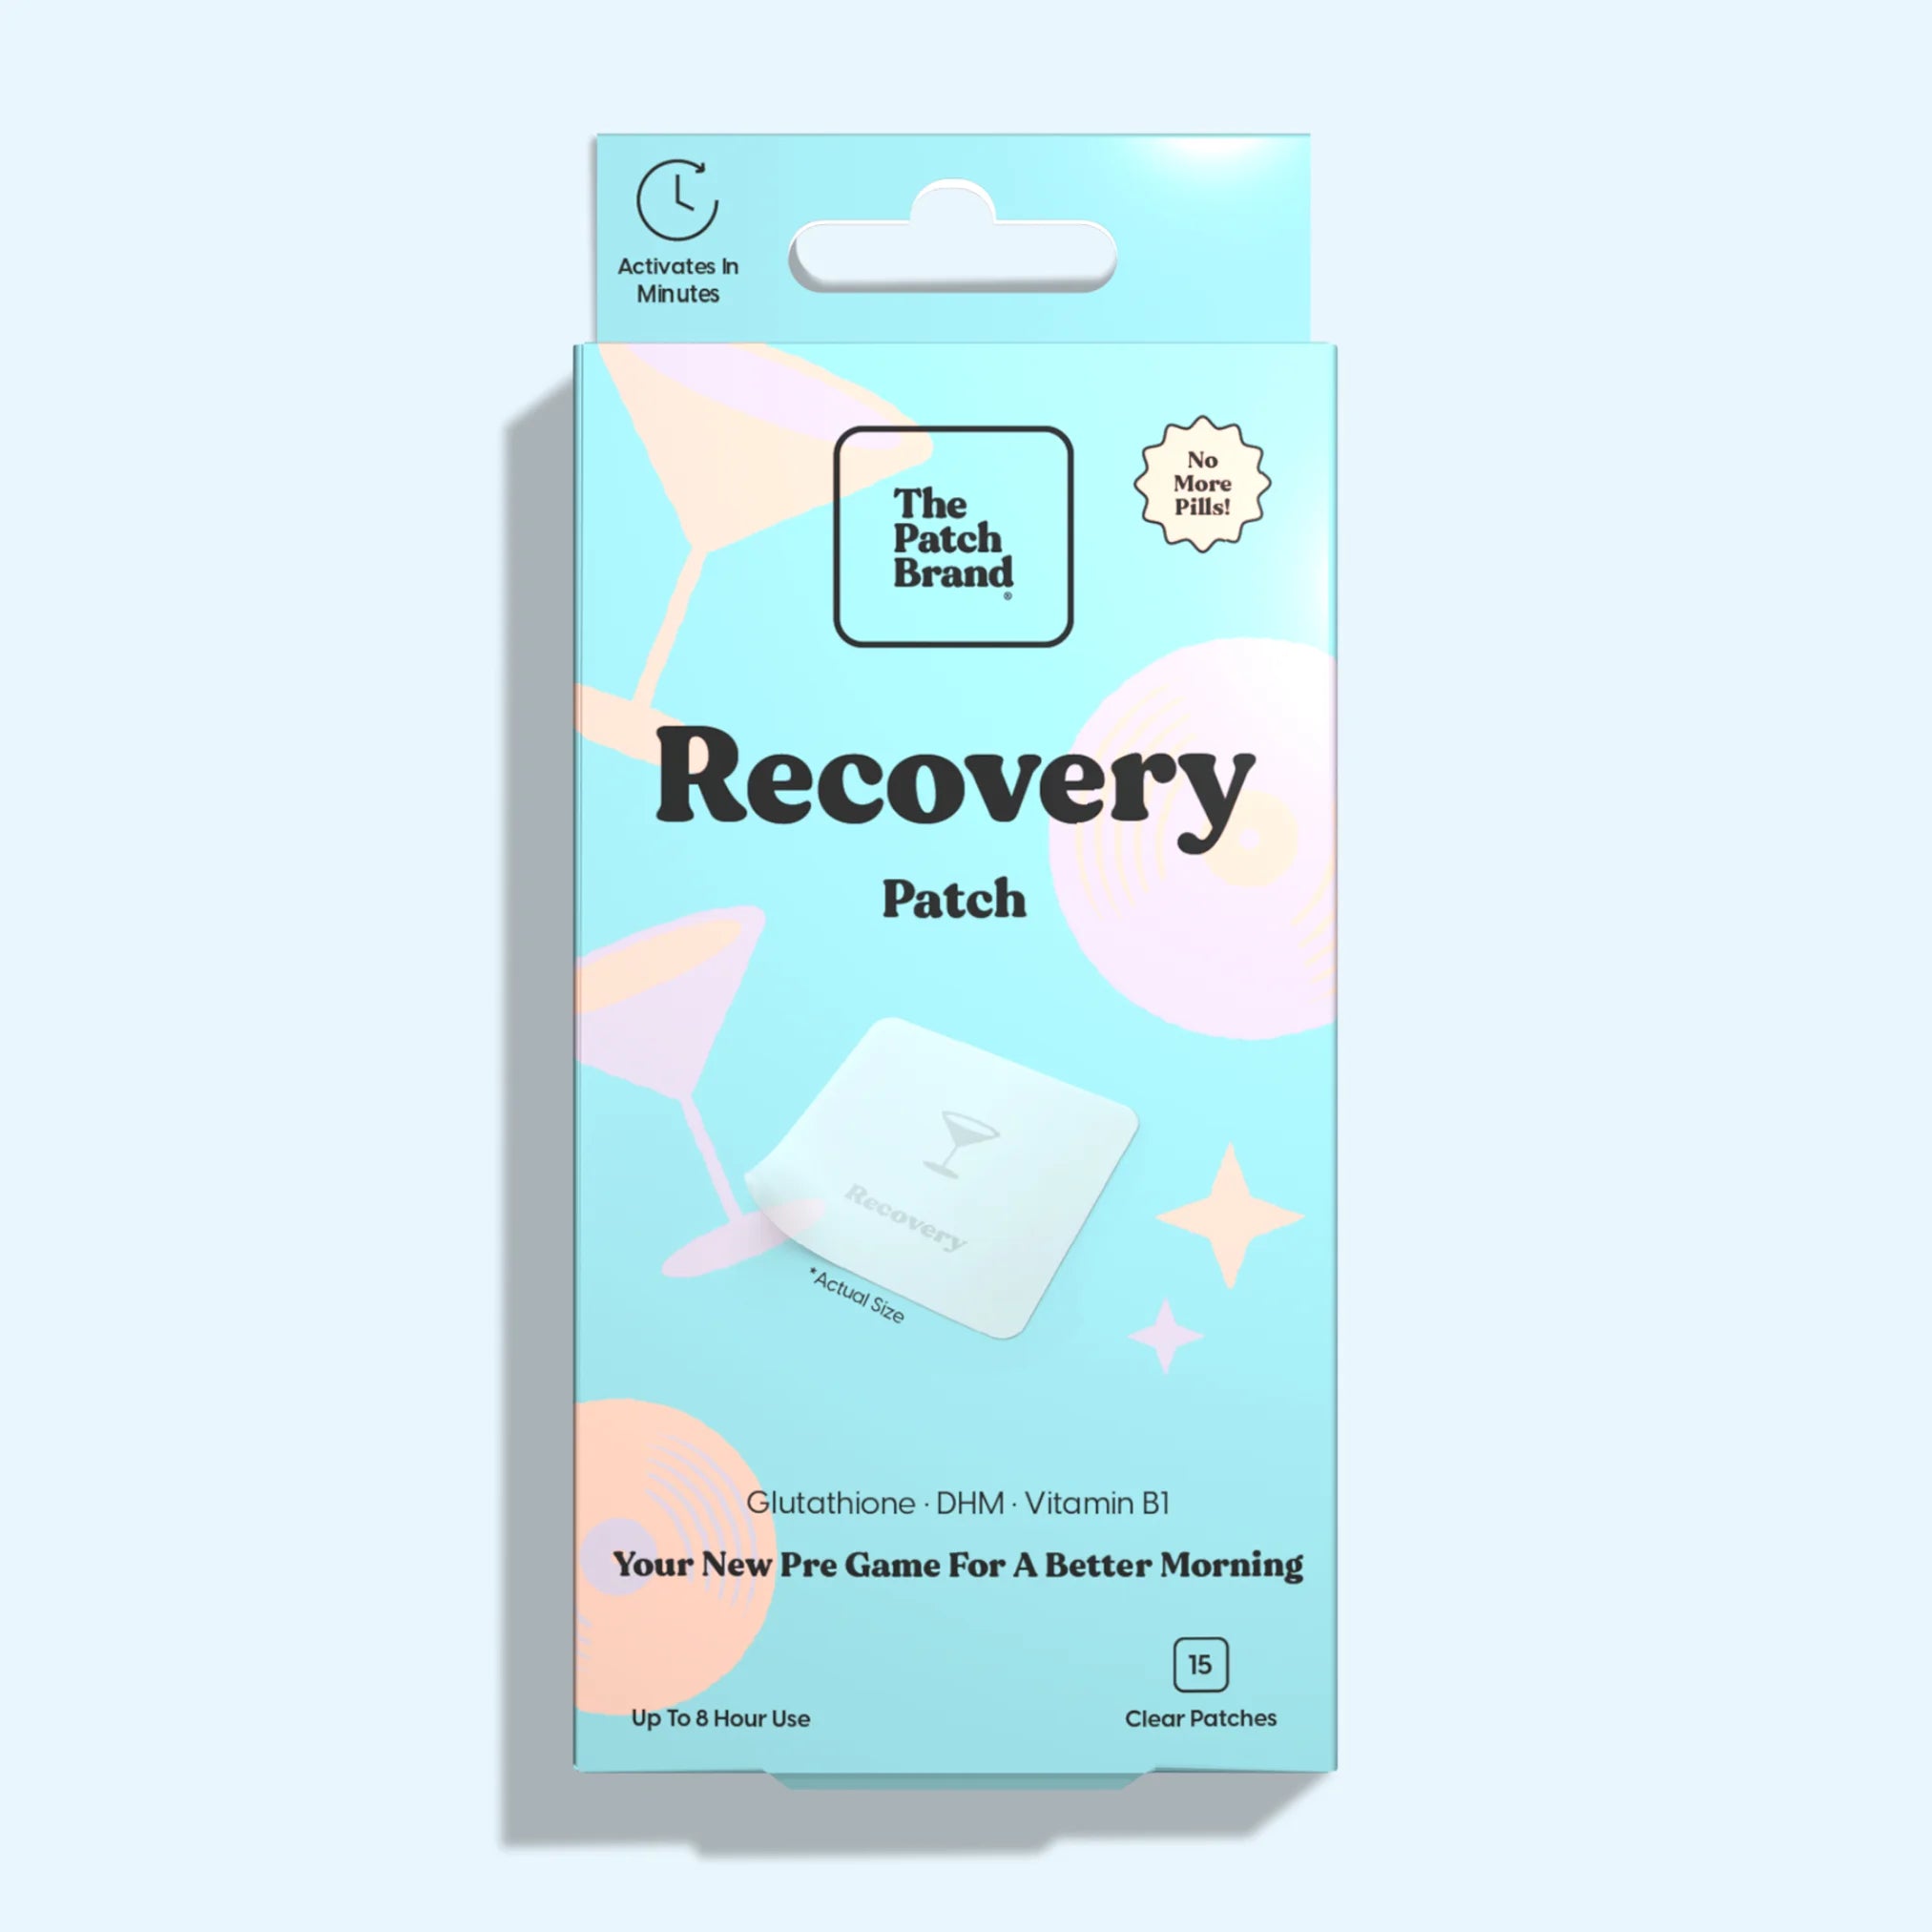 Rest & Recover Duo - The Good Patch